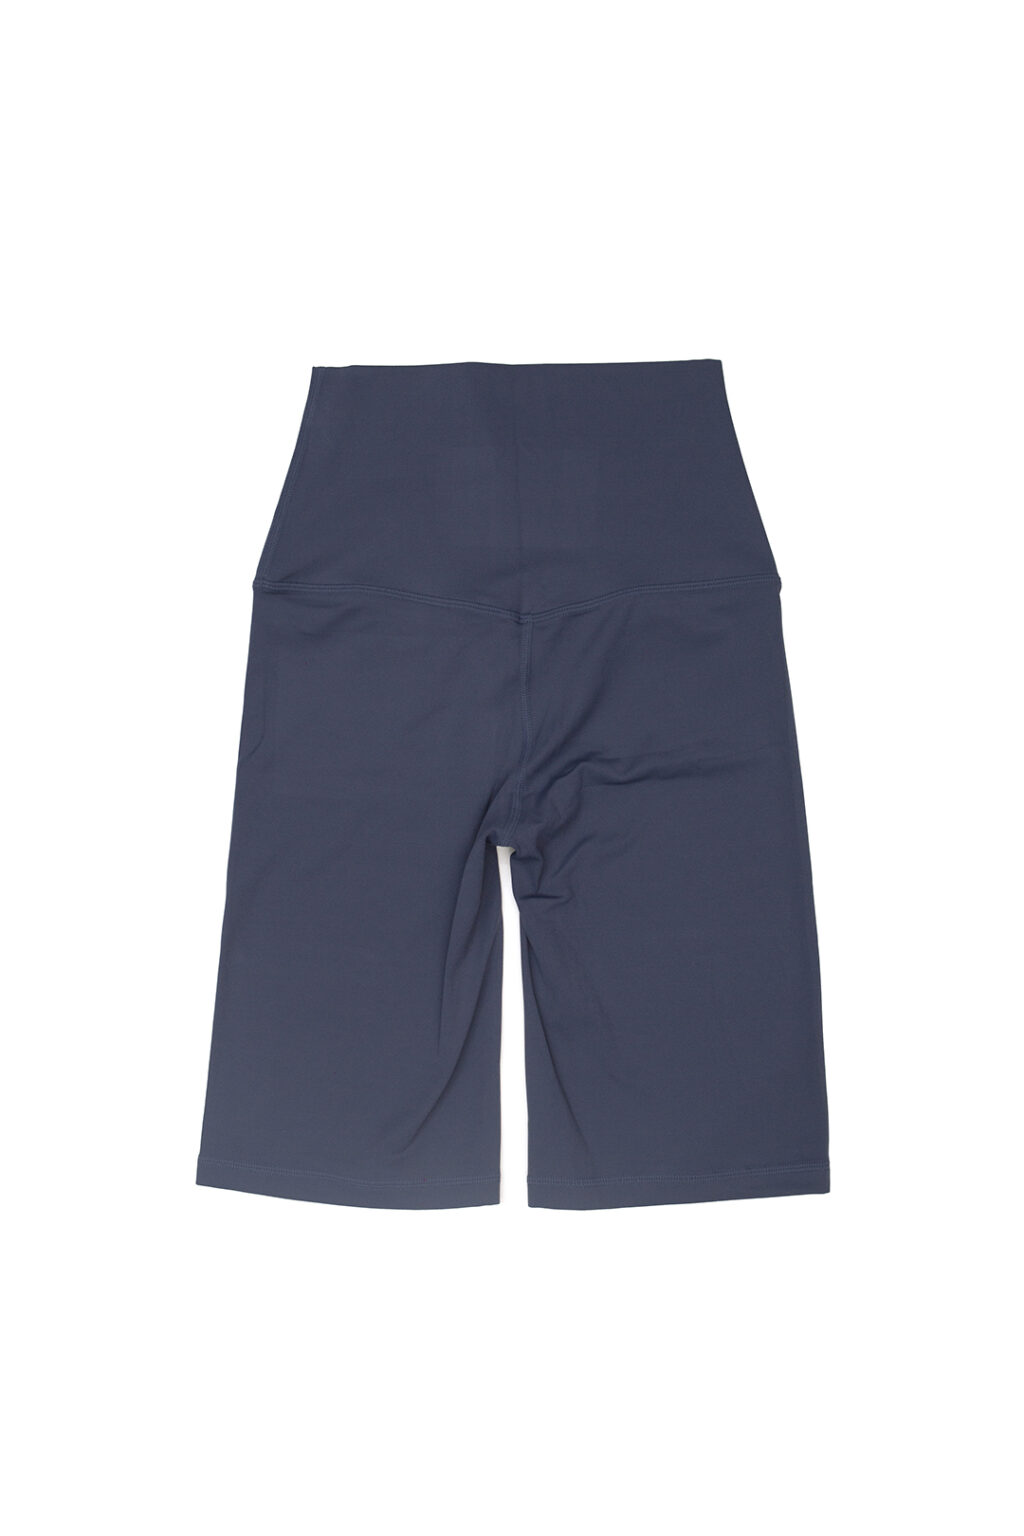 Time Out X Bike Shorts – Dusty Blue – Back